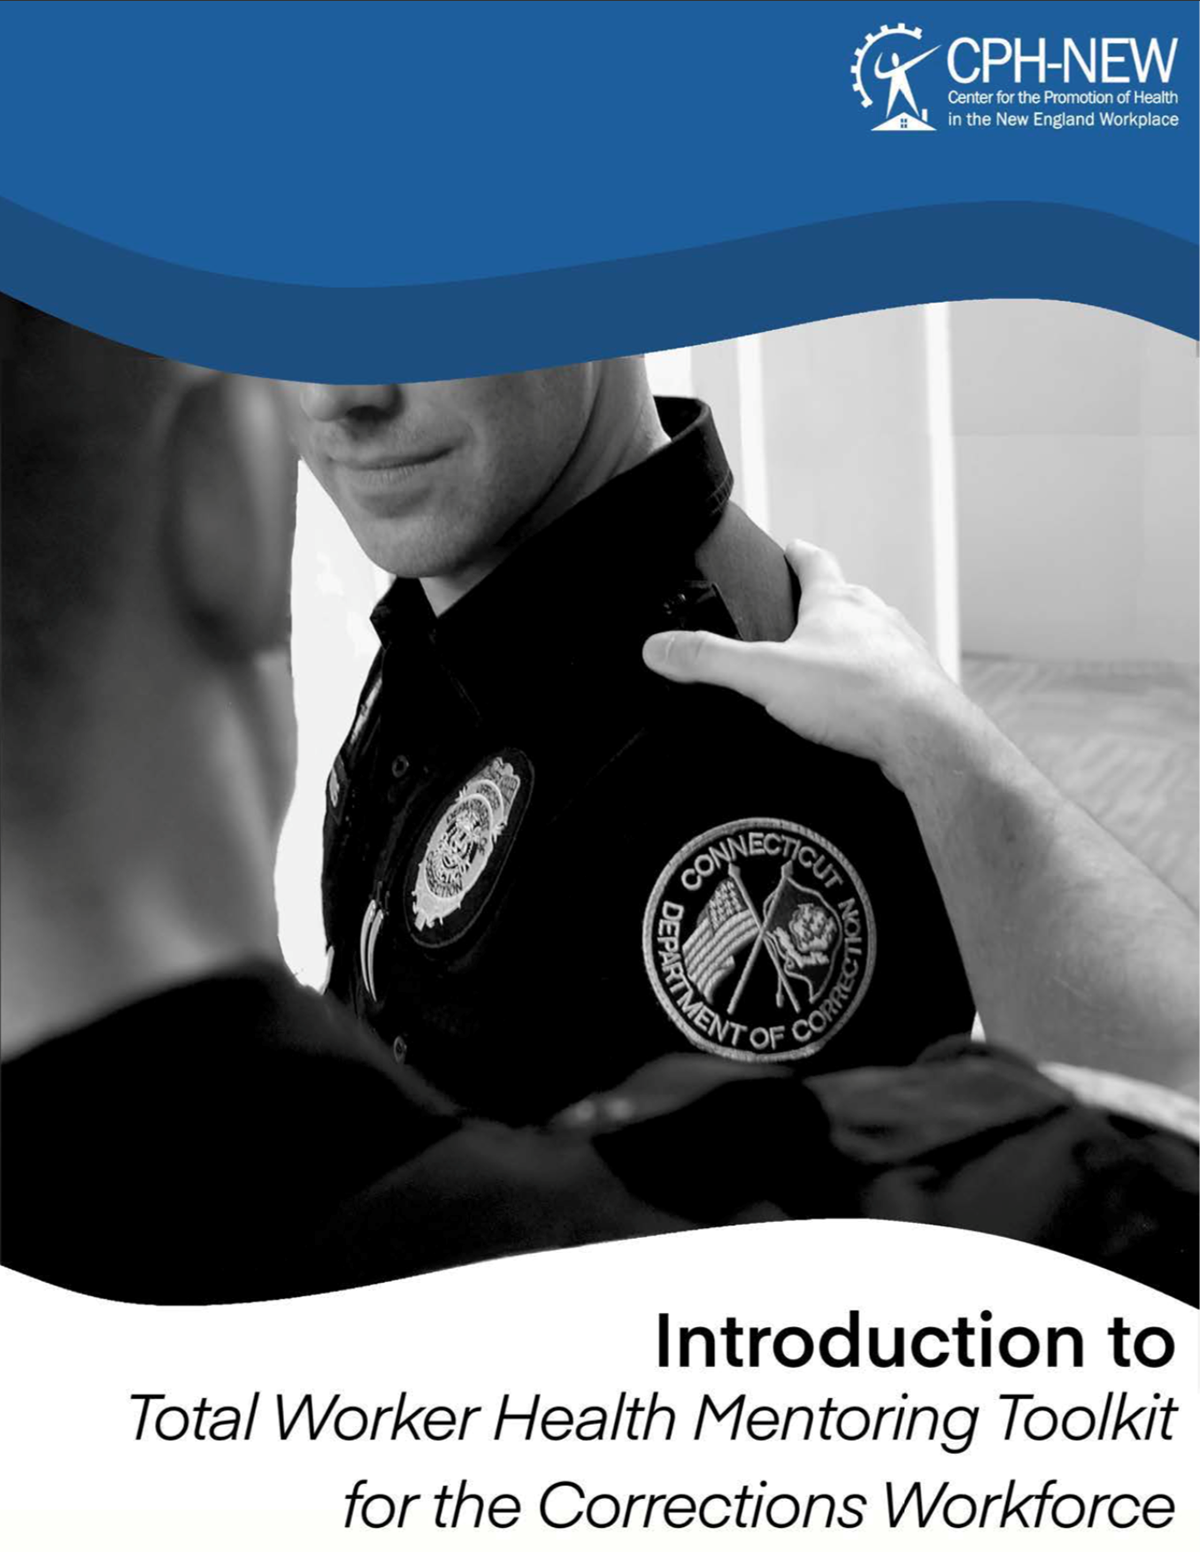 Cover of Mentor Toolkit. Black and white image of two corrections officers. Blue border on the top part of the image with the CPH-NEW logo. Bottom white border with the title, "Introduction to Total Worker Health Mentoring Toolkit for the Corrections Workforce"